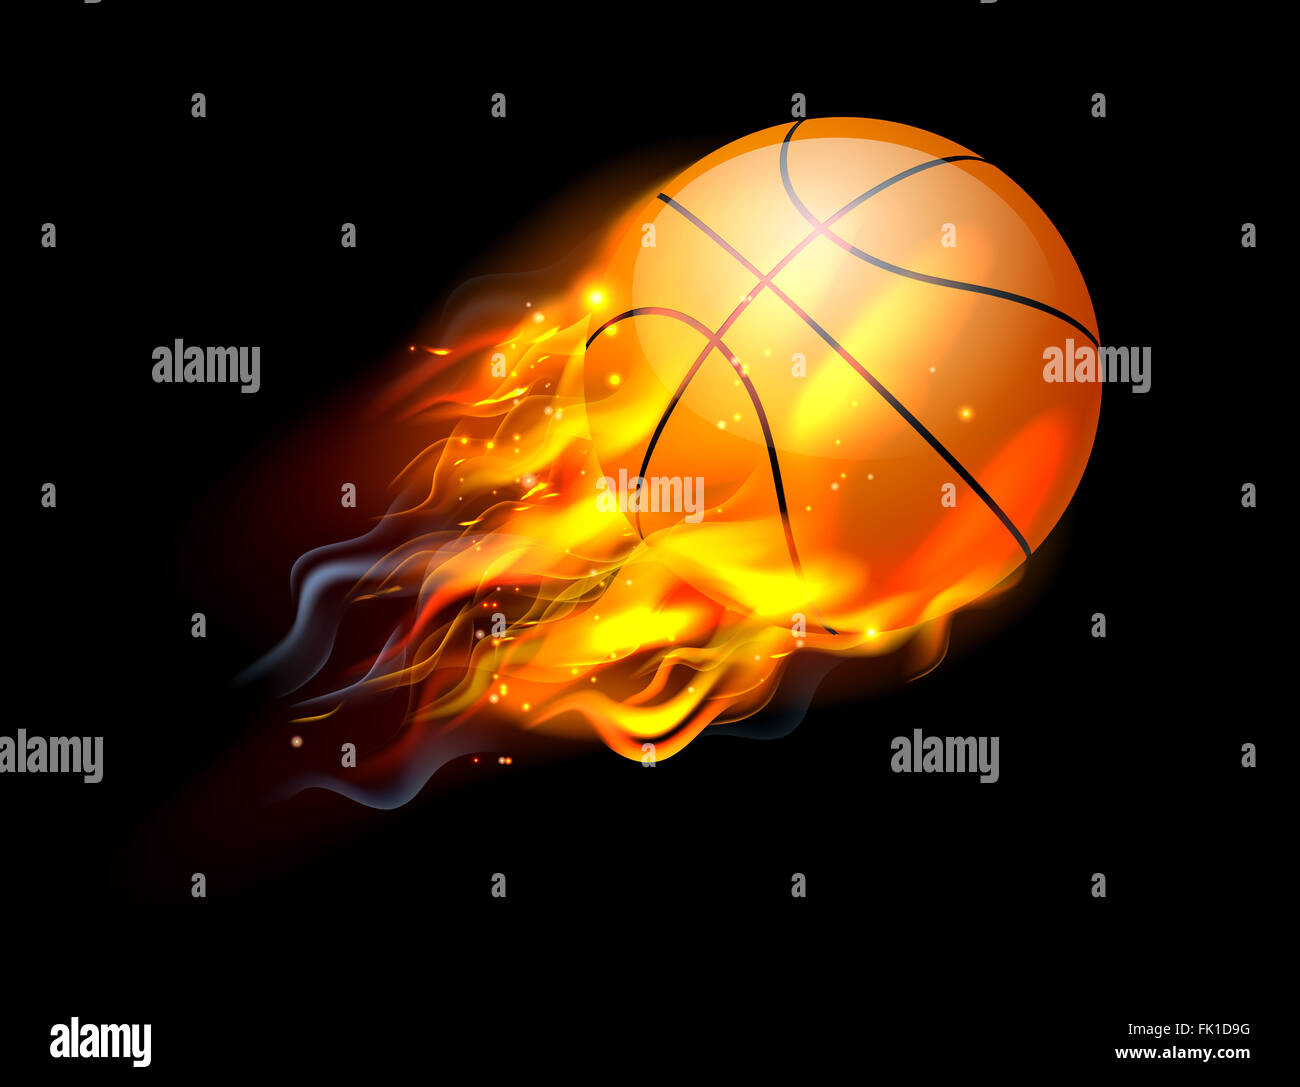 A flaming basketball ball on fire flying through the air Stock Photo